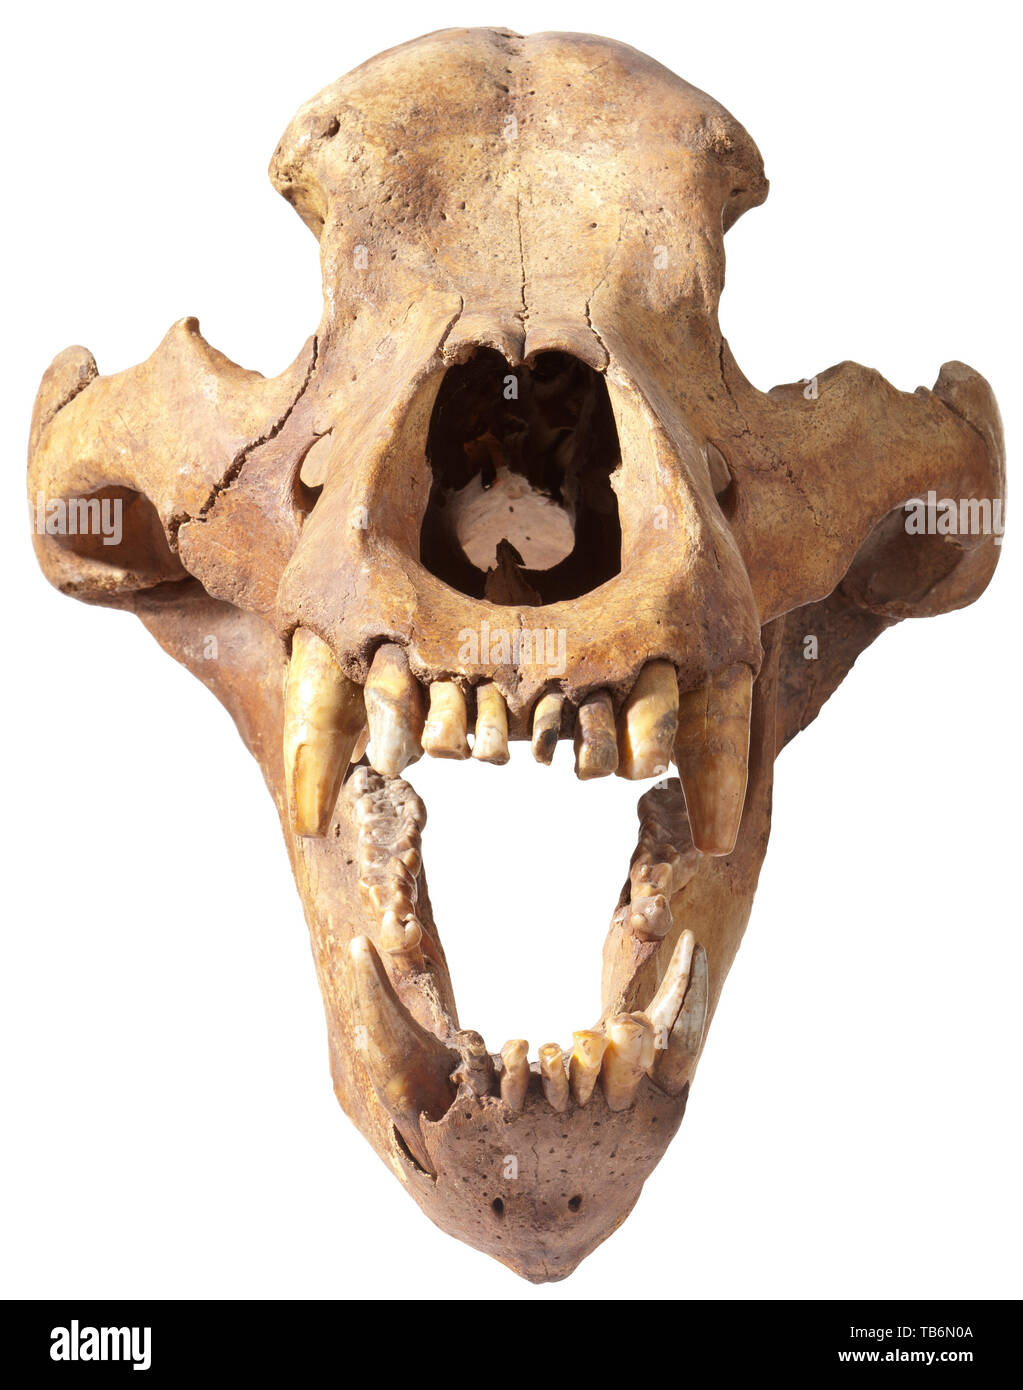 The skull of a bear - Siberian Ice Age, circa 30,000 B.C, An almost perfect and completely preserved bear skull of the Ursus spelaeus species, prevalent in Siberia in the Pleistocene era. The jaws wide open, almost all the teeth still in place. In an excellent state of preservation. Height 24 cm, length 52 cm, width 30 cm. Rarely found in this condition. handicrafts, handcraft, craft, object, objects, stills, clipping, clippings, cut out, cut-out, cut-outs, historic, historical prehistory, Additional-Rights-Clearance-Info-Not-Available Stock Photo